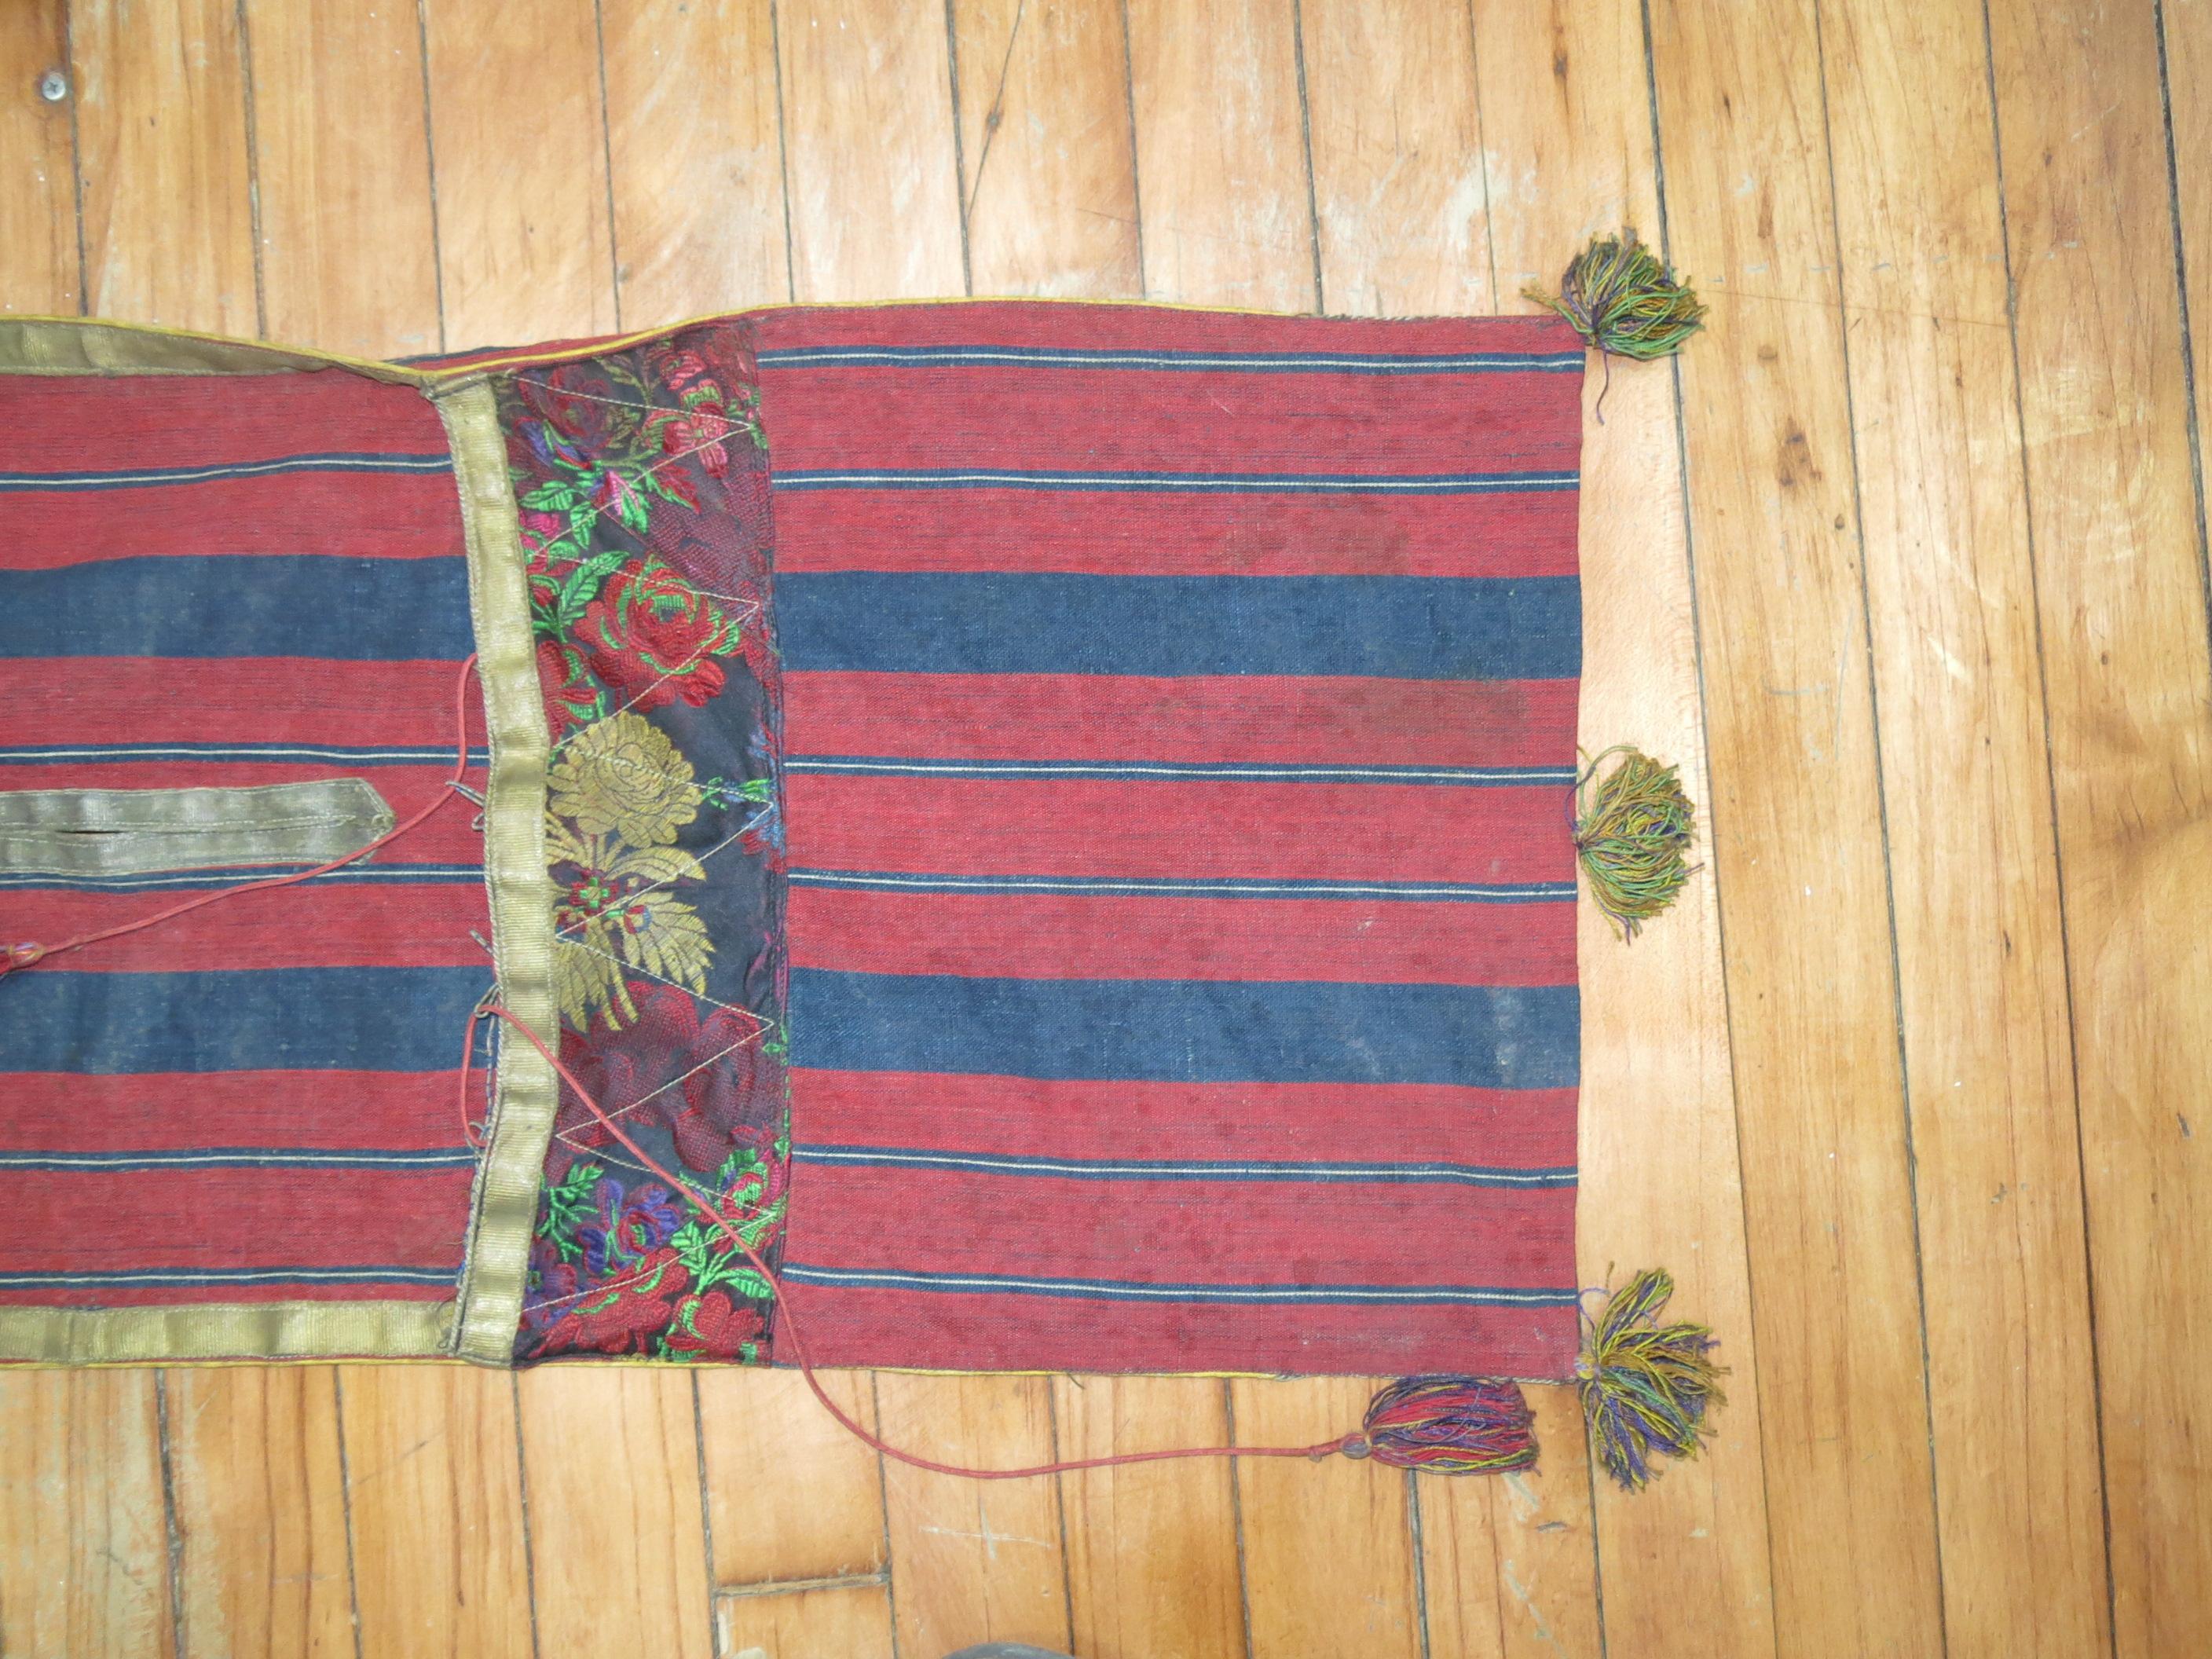 Handwoven Indian textile in reds and blues

Measures: 13'' x 37'.